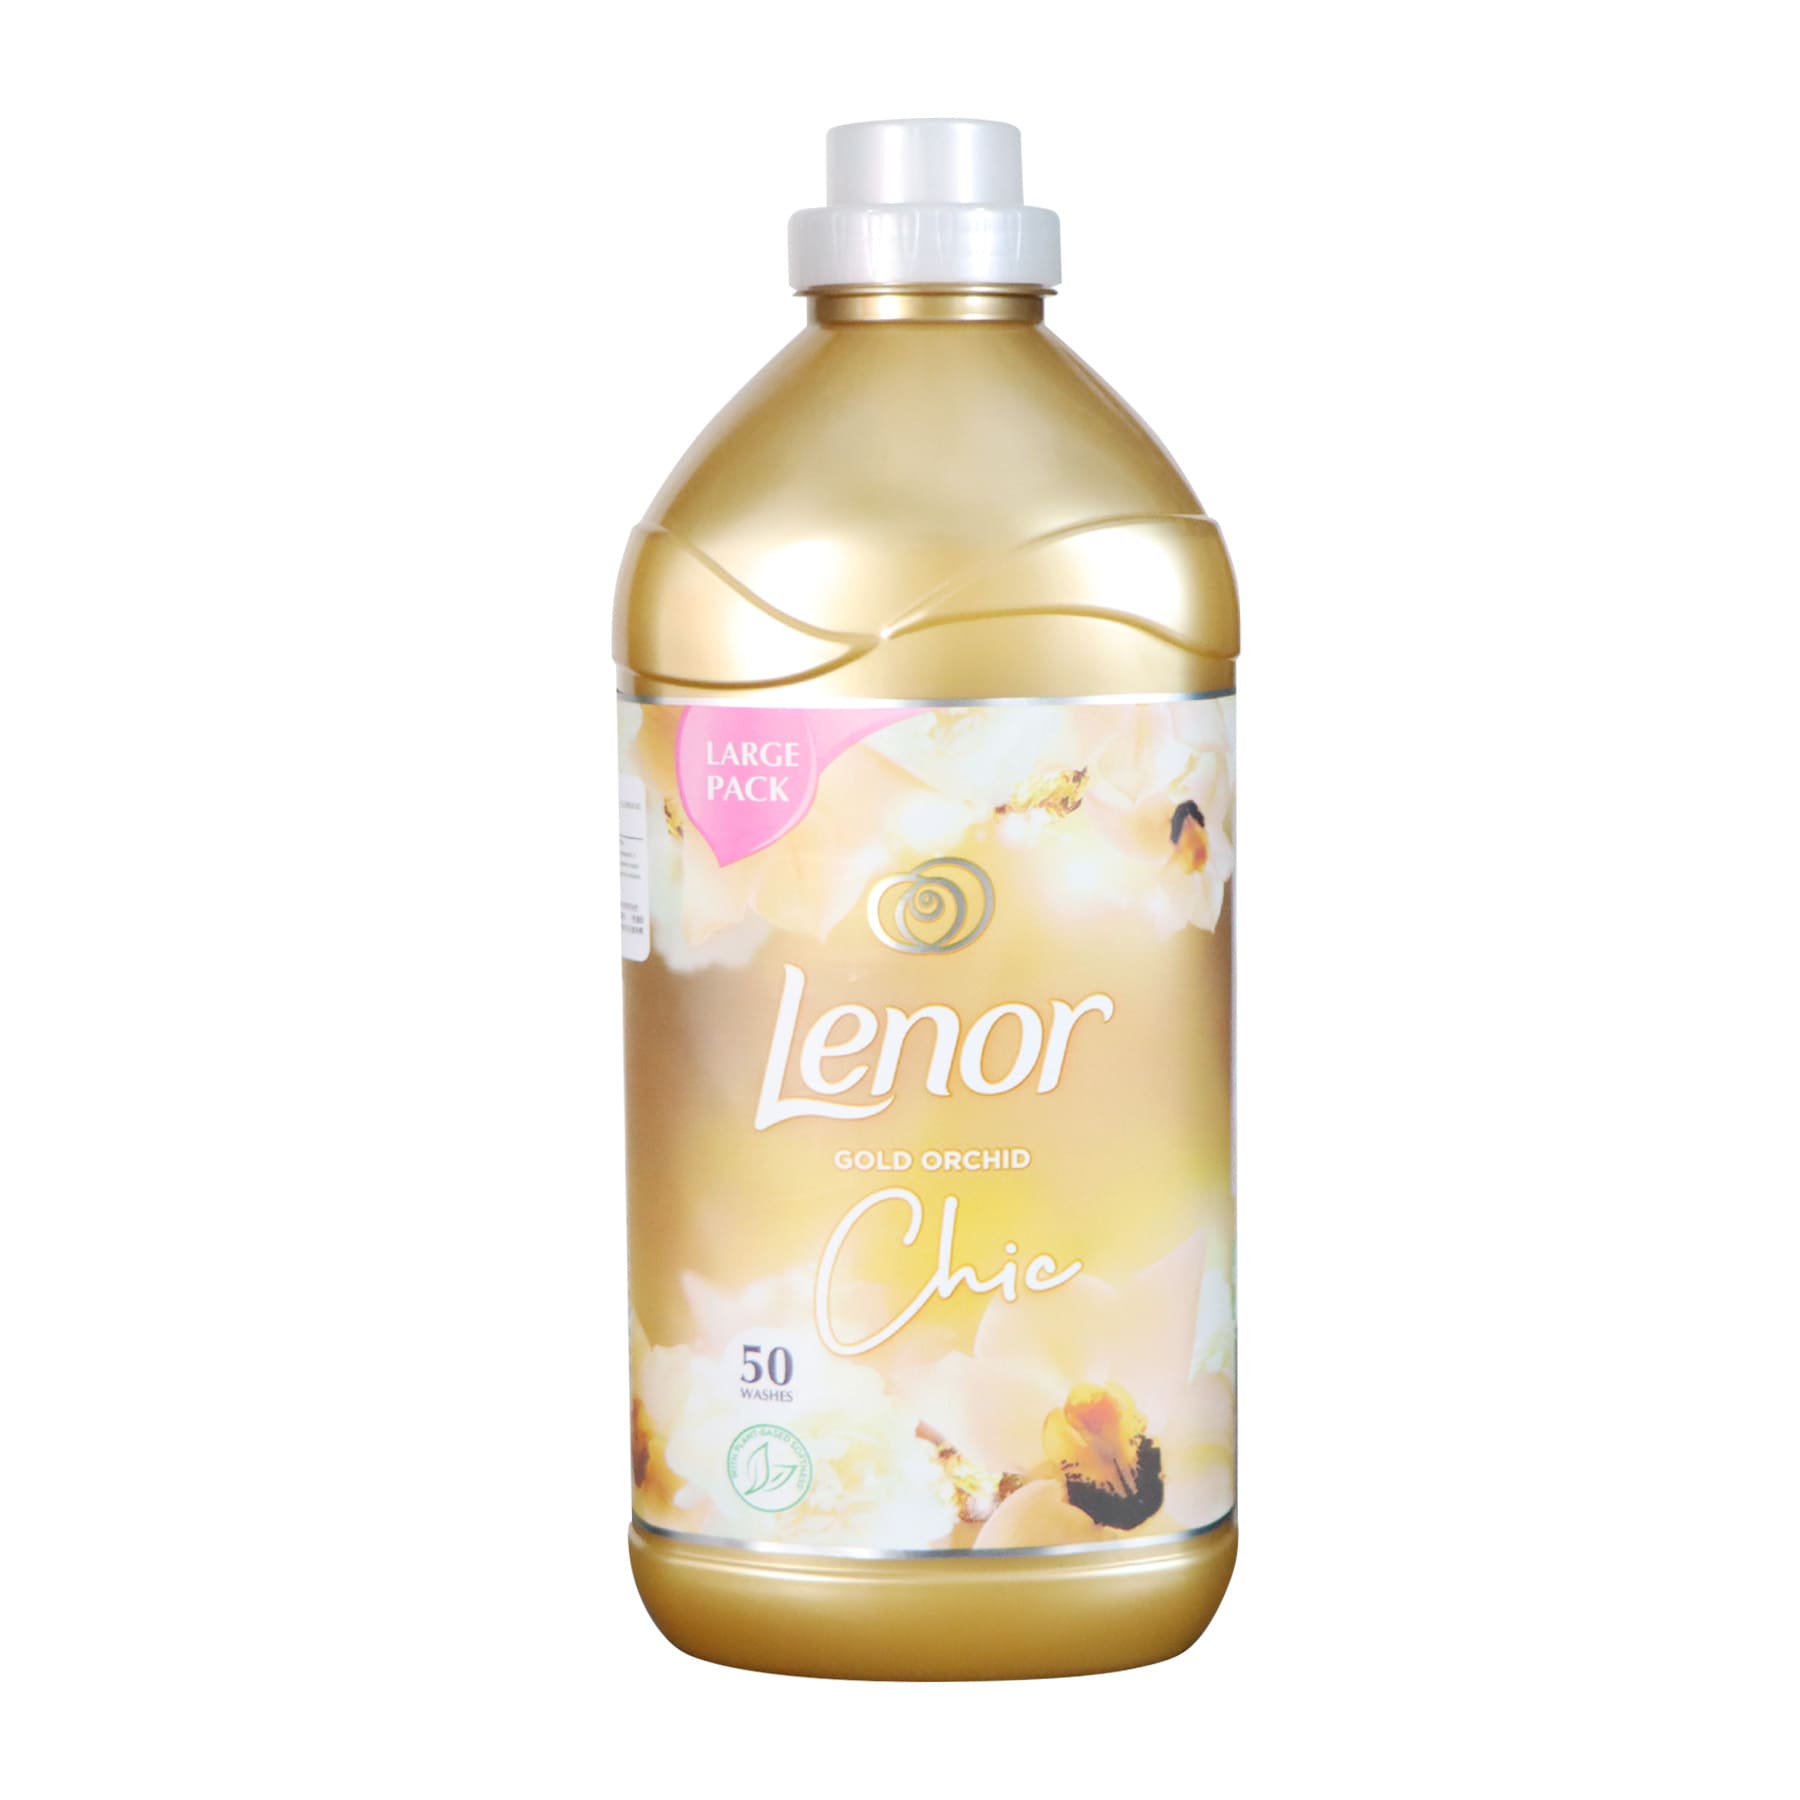 [P&G] Lenor Fabric Conditioner 1.75L (Gold Orchid)